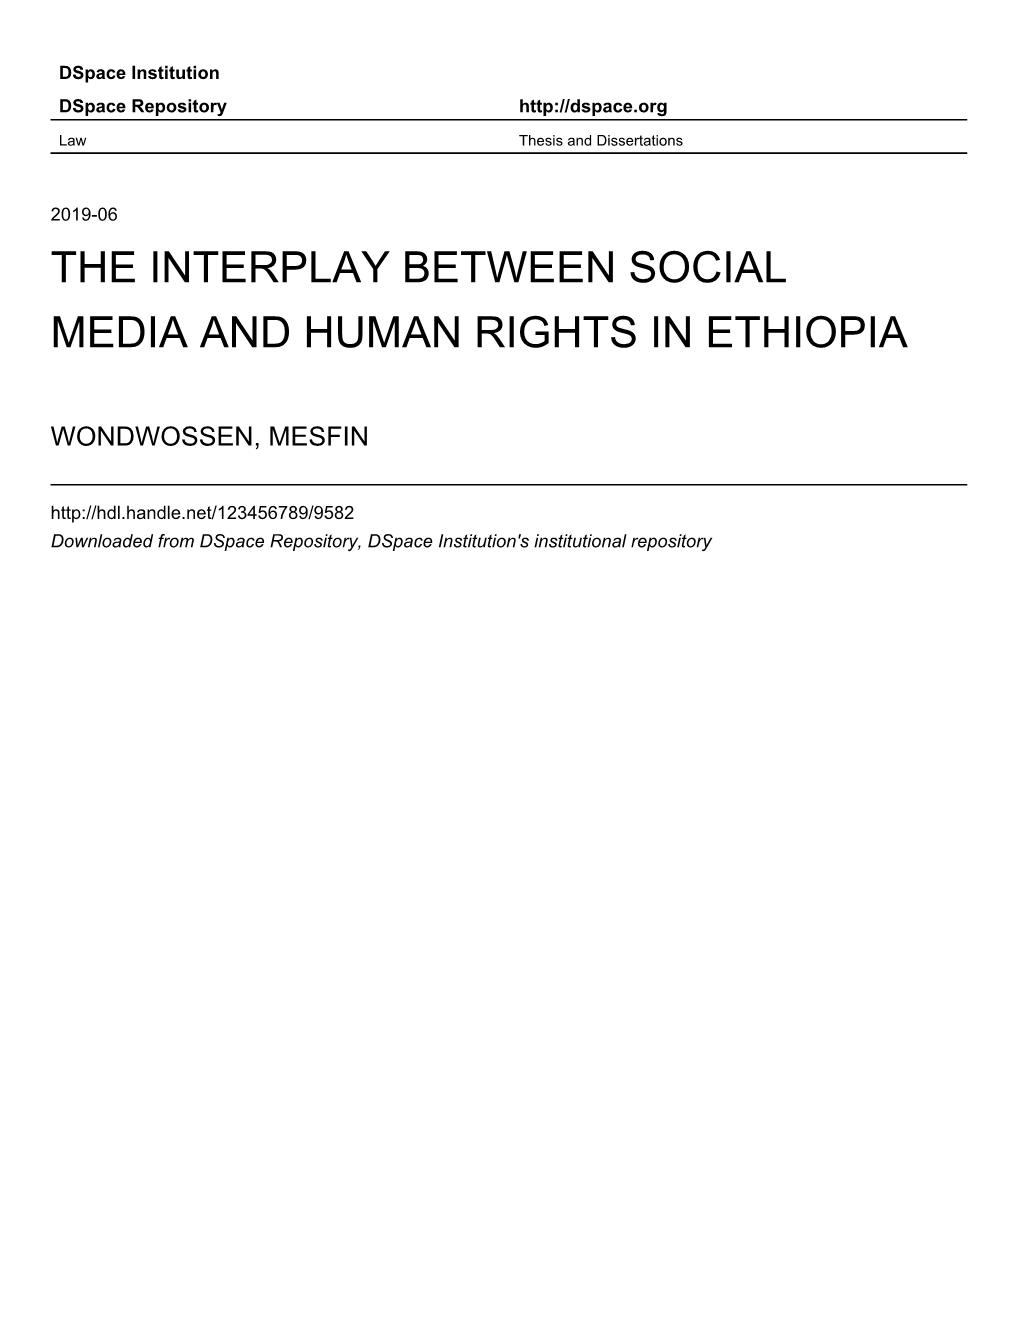 The Interplay Between Social Media and Human Rights in Ethiopia